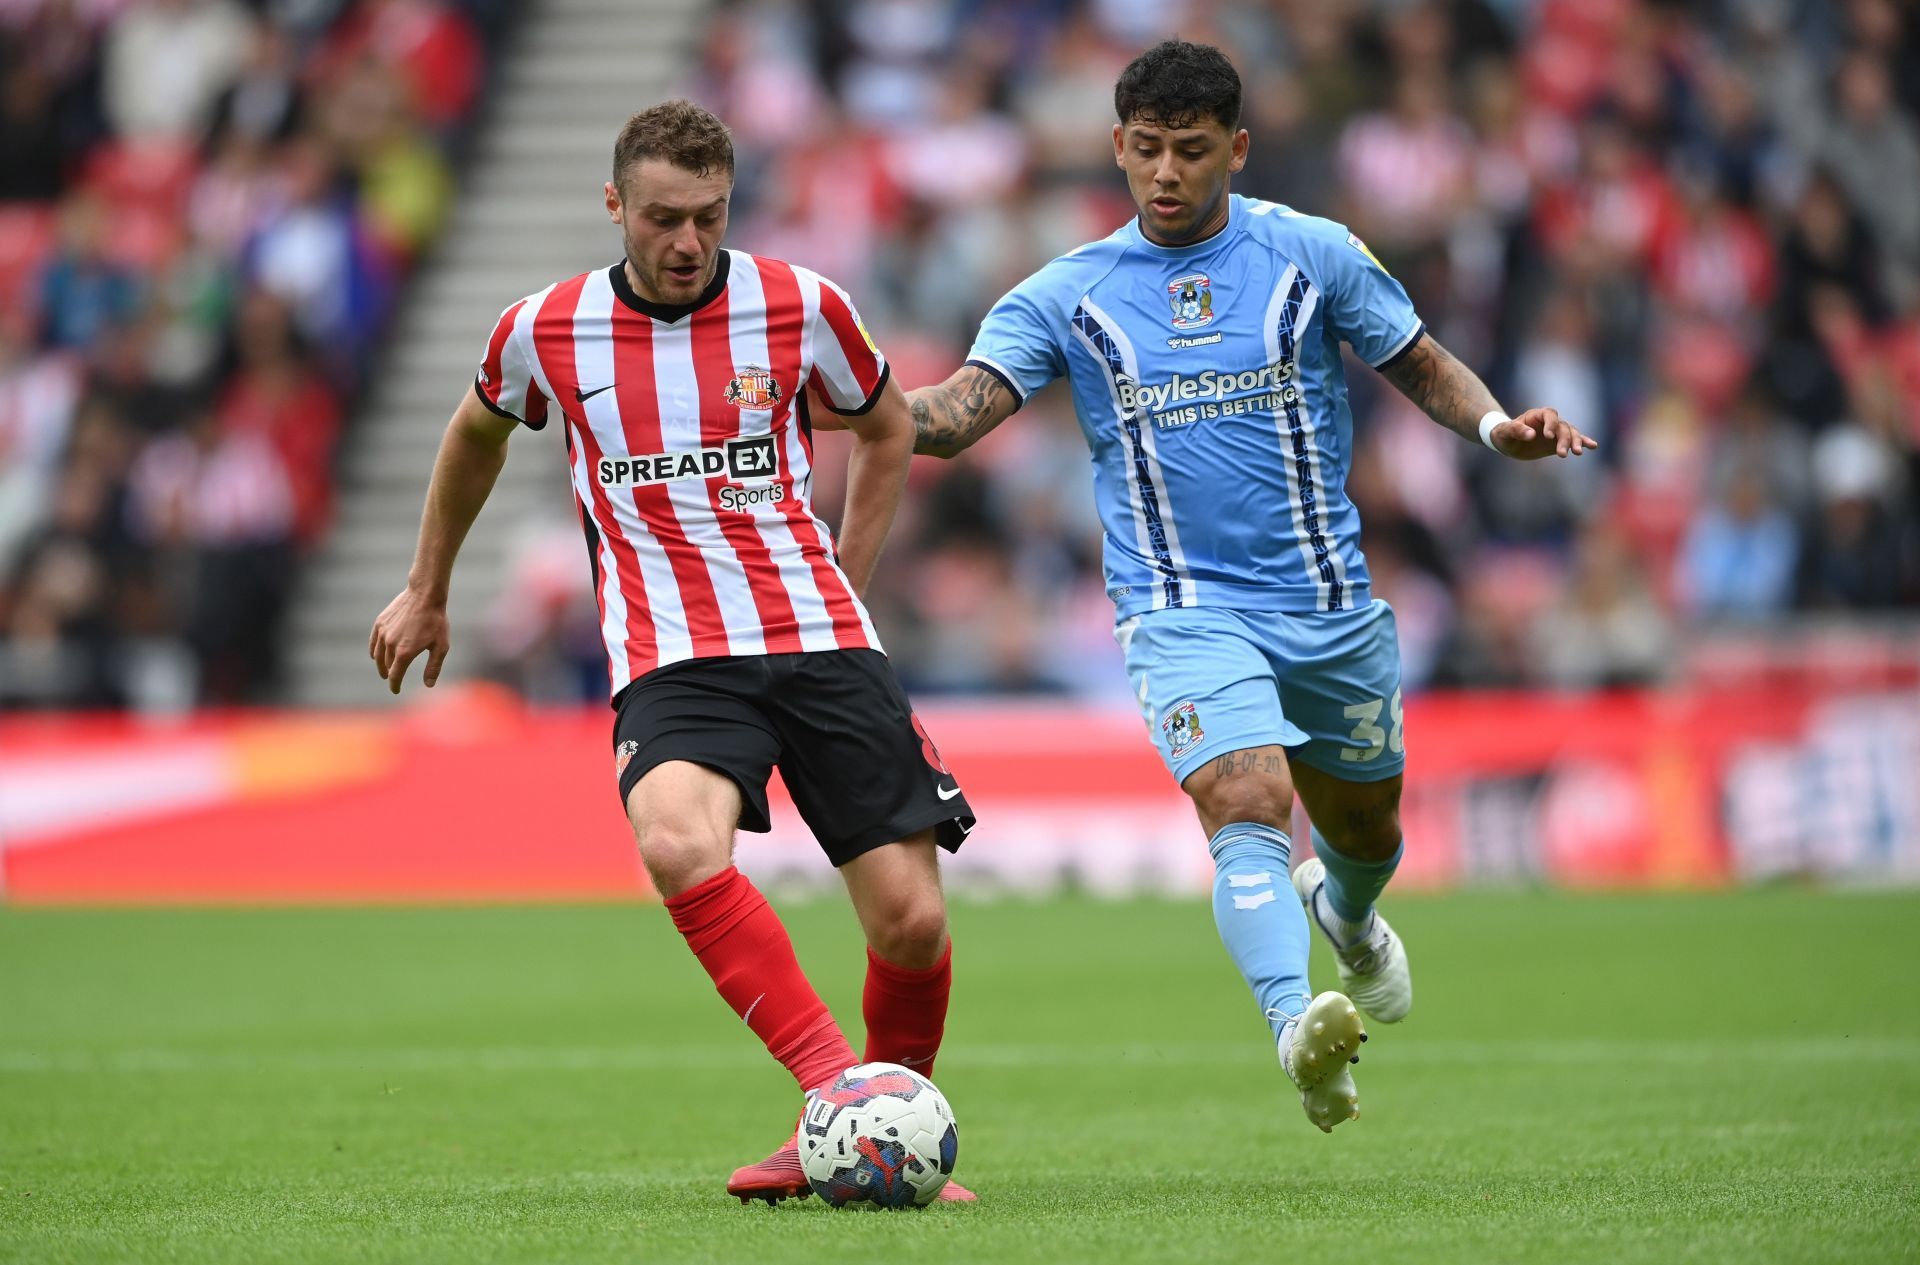 Sunderland were held on the opening day